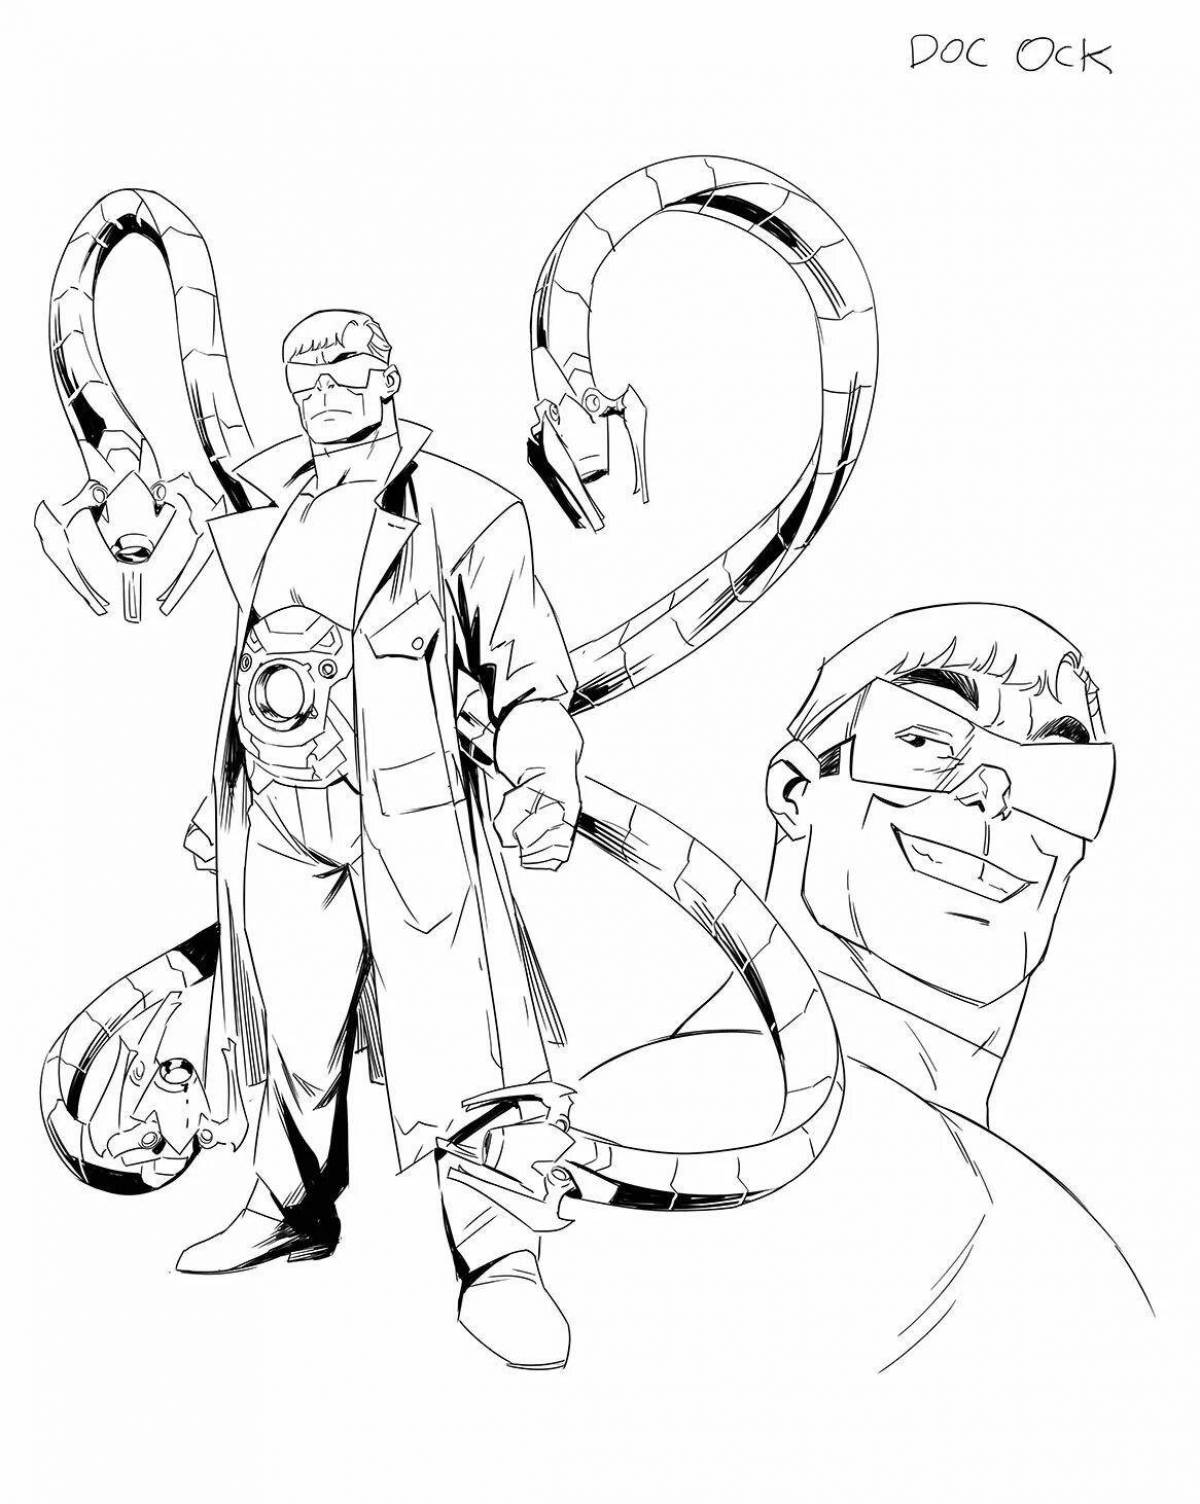 Smart Doctor Octopus from Spider-Man